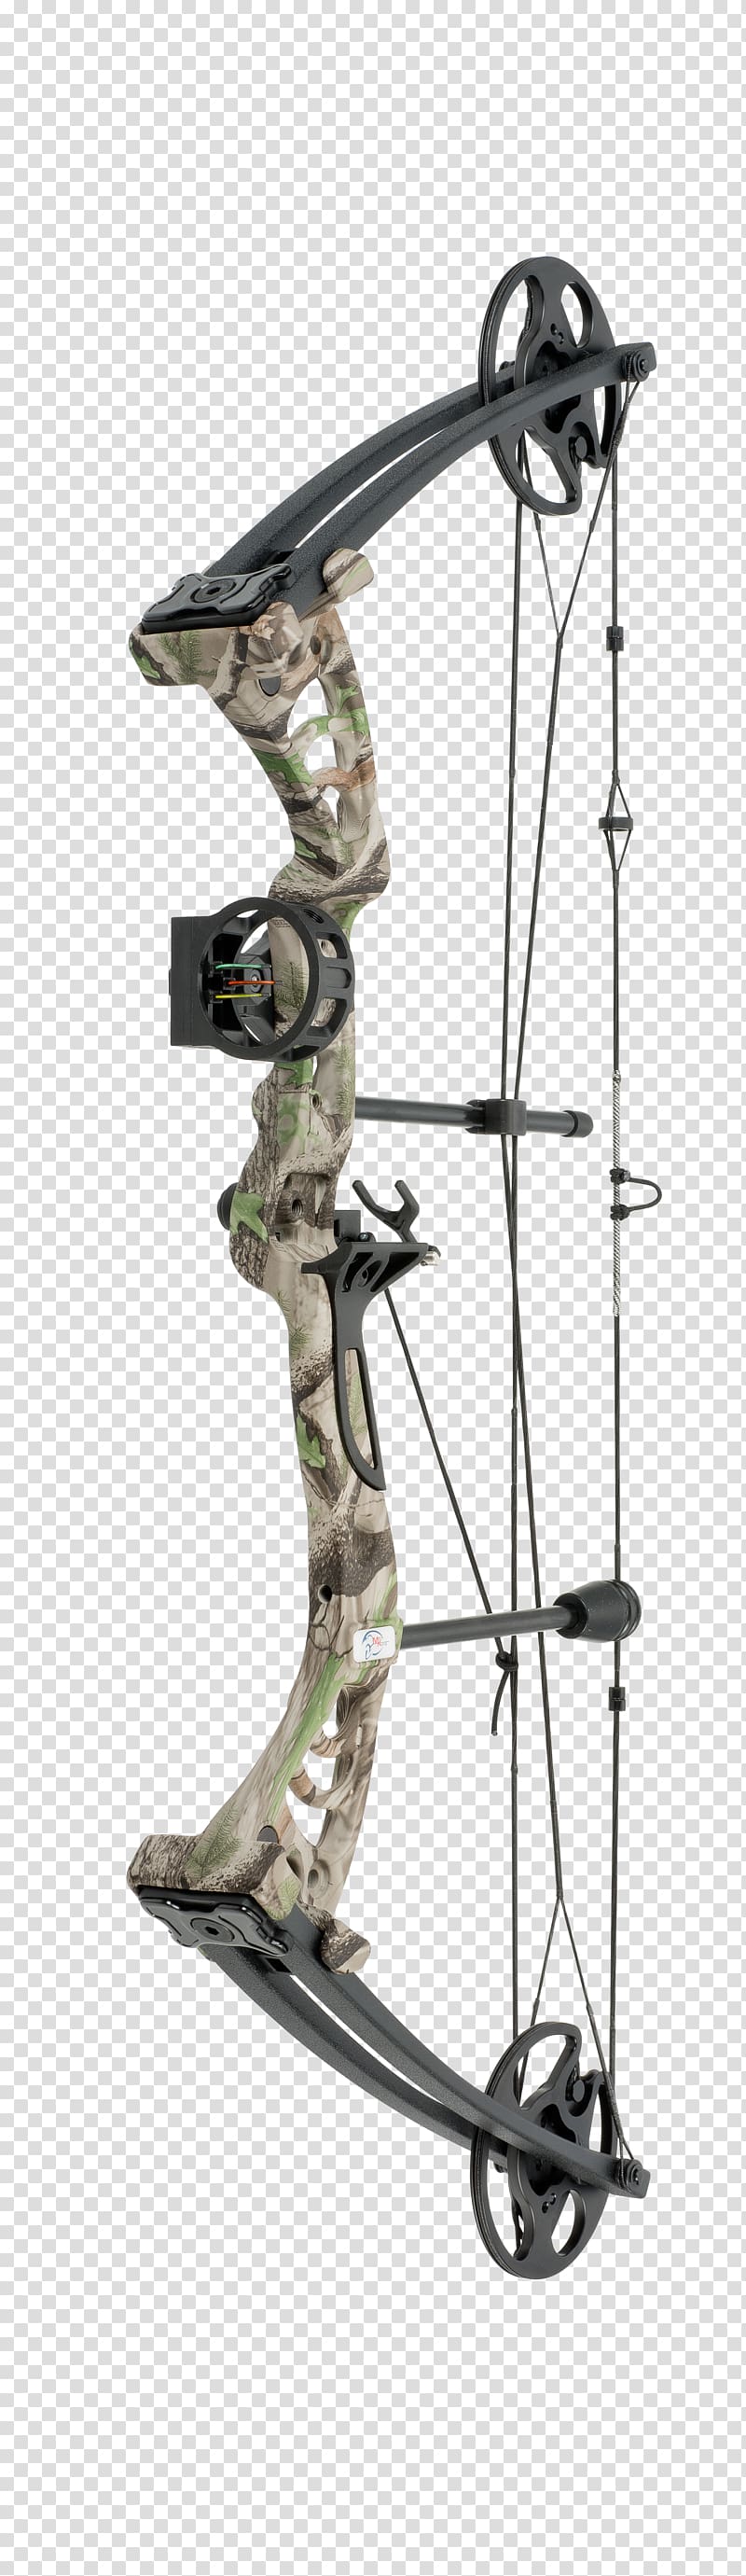 Compound Bows Bow and arrow Hunting Crossbow, bow transparent background PNG clipart